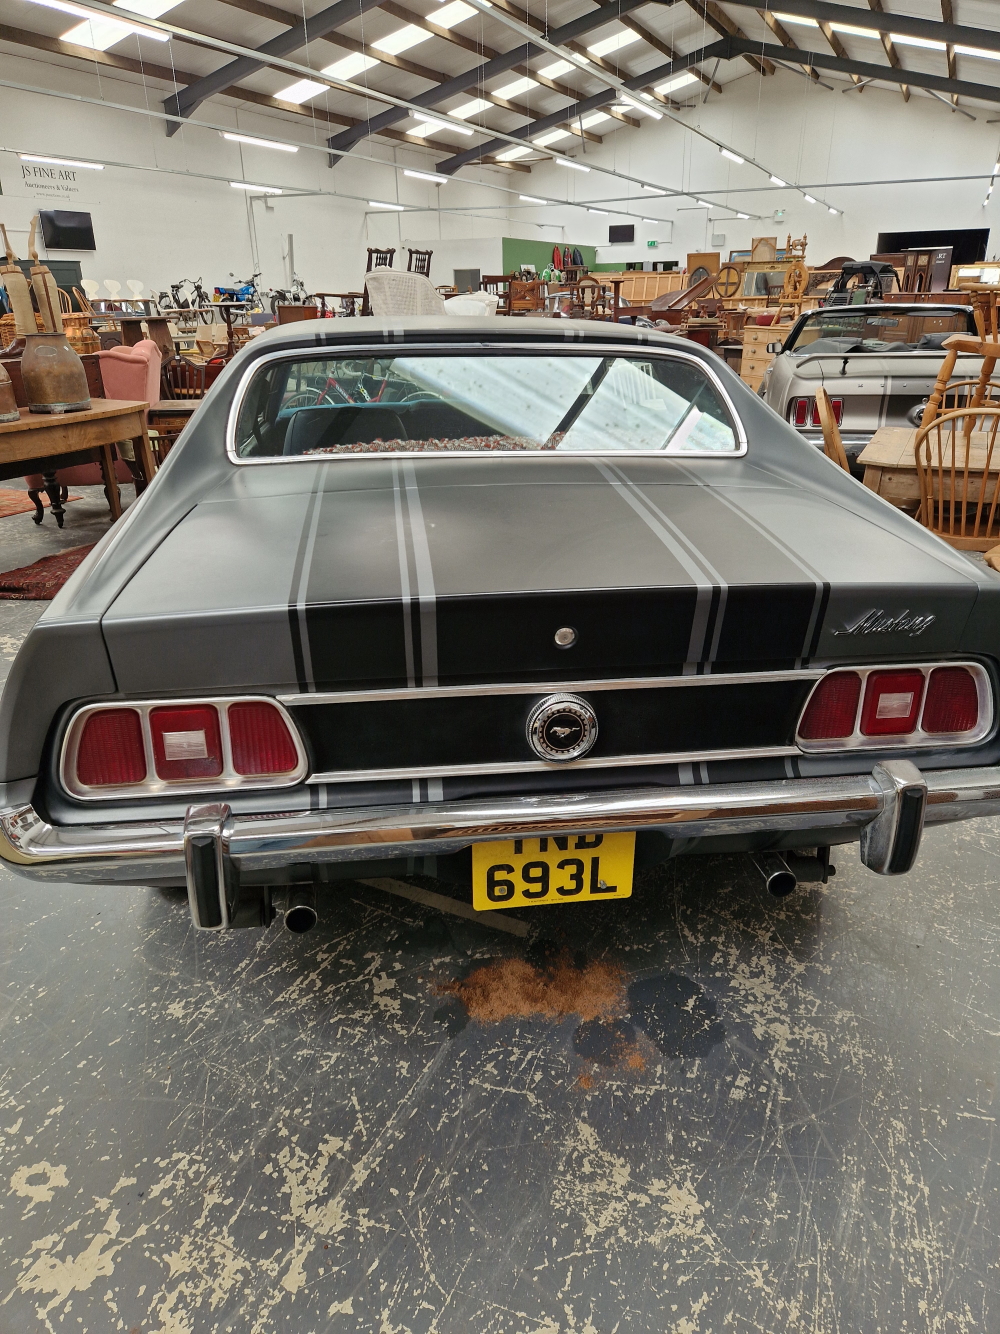 1973 FORD MUSTANG 302 CU.IN. V8 COUPE. EXCELLENT RUNNER AND DRIVER. RECENT FULL REPAINT IN MATTE - Image 46 of 50